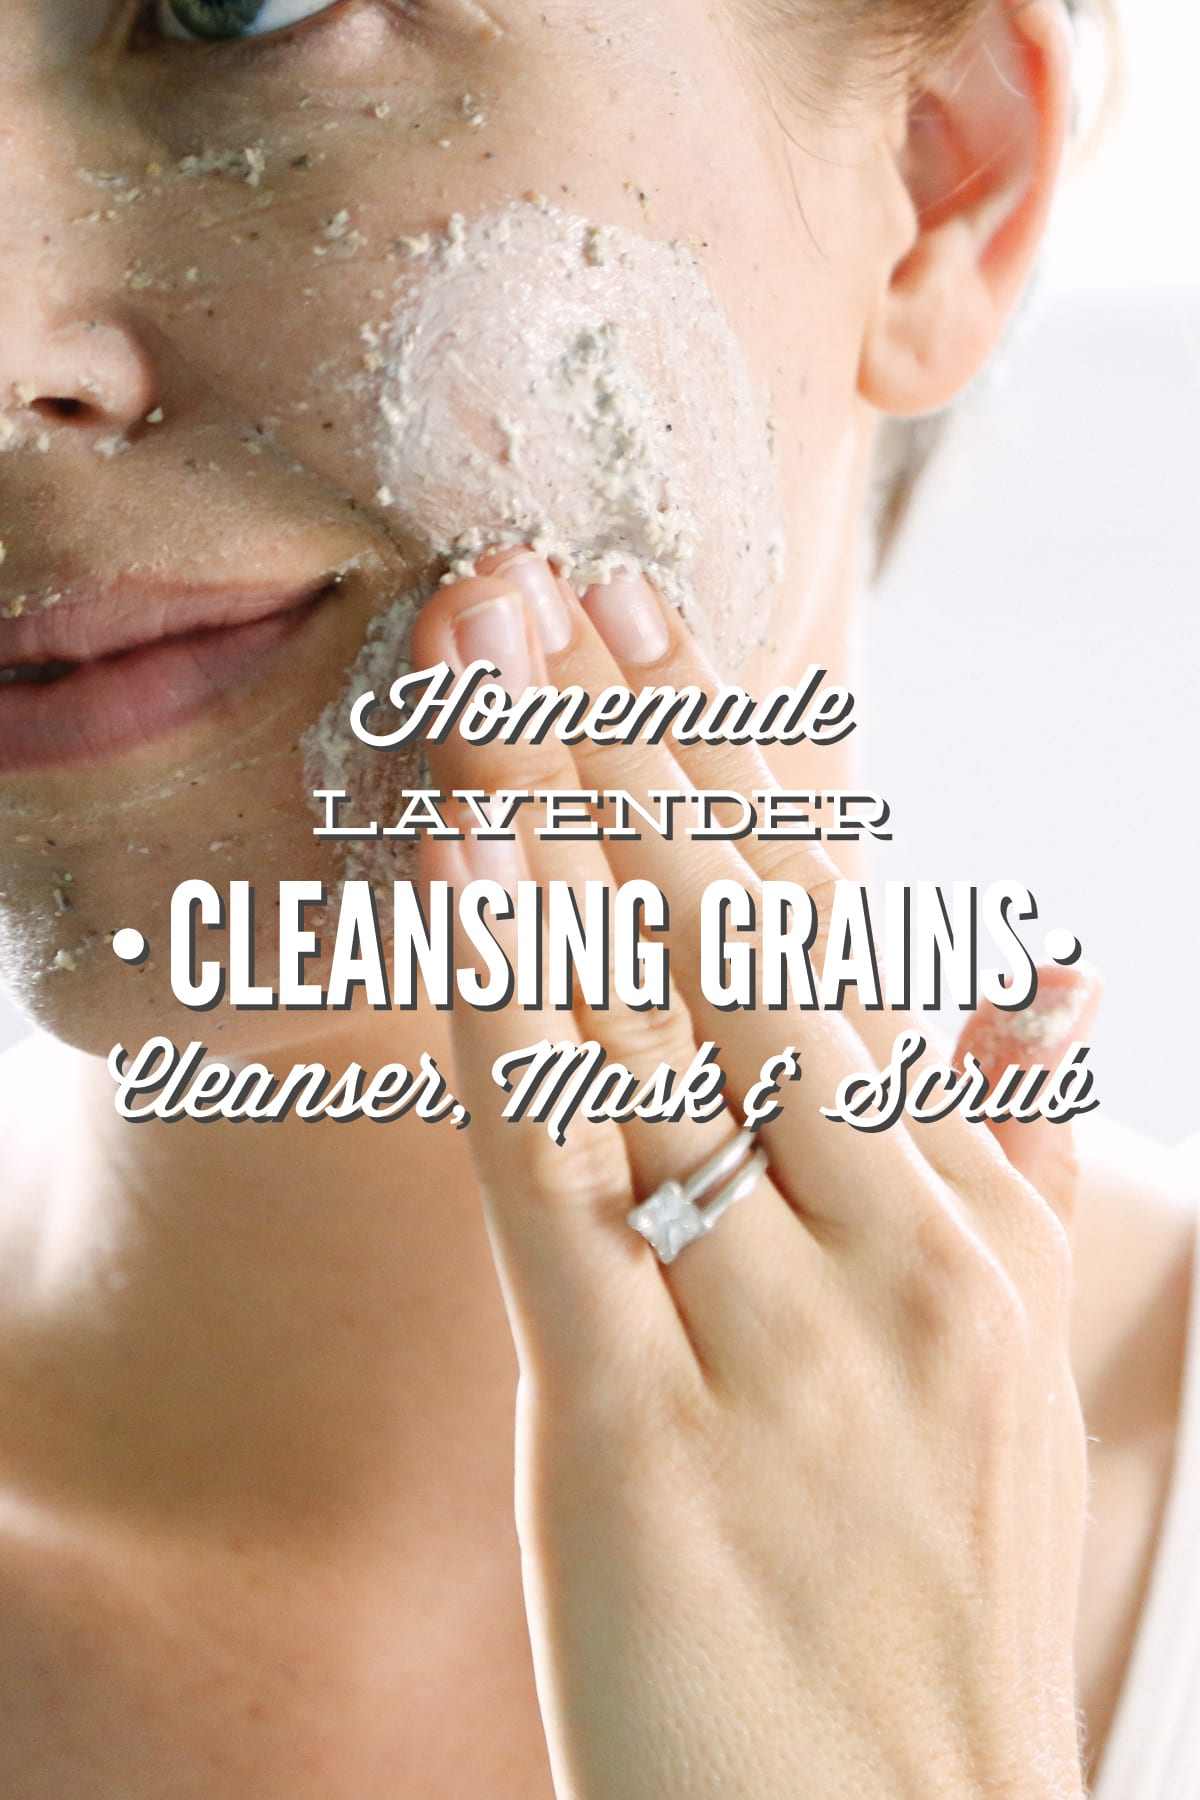 Homemade Lavender Cleansing Grains: Facial Cleanser, Mask, or Scrub